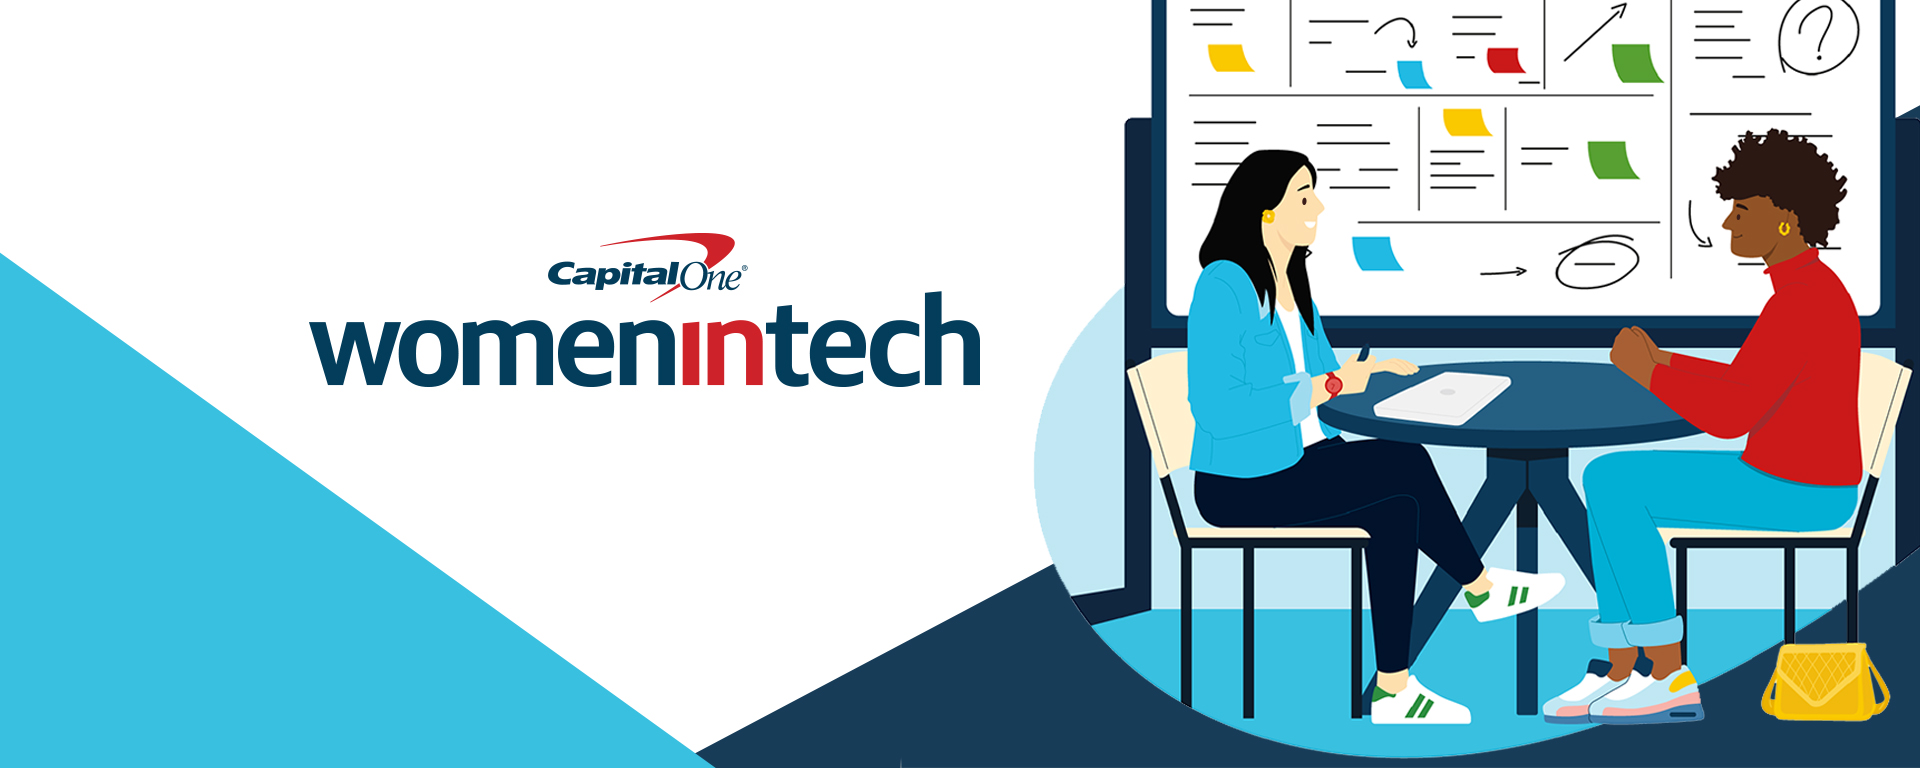 Illustration of two women sitting in front of a white board with the title Capital One Women in Tech